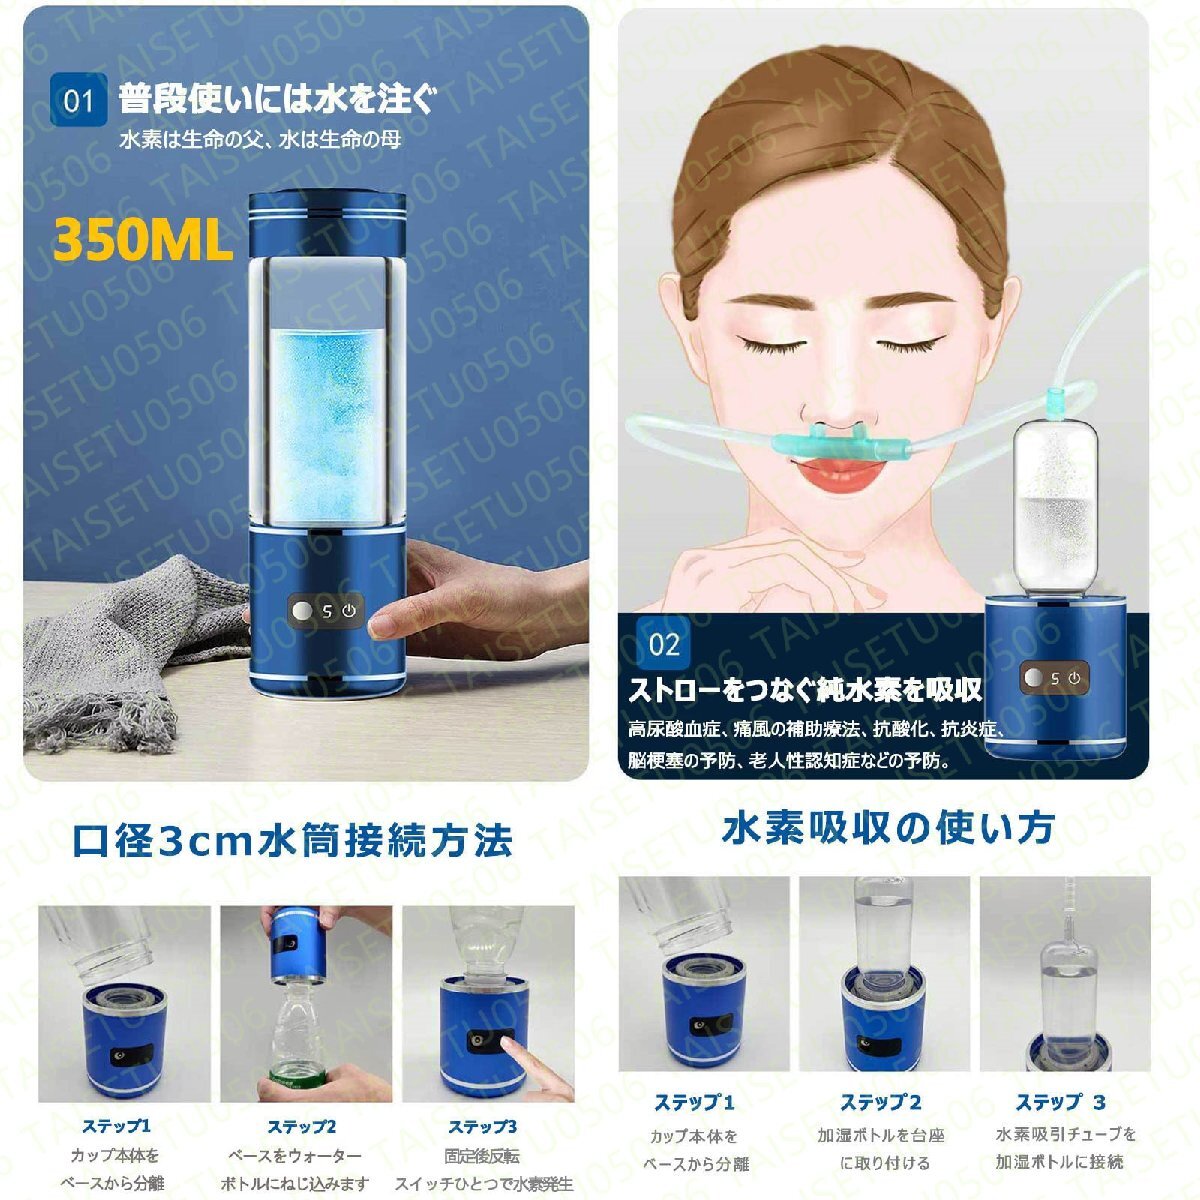  water element aquatic . vessel high density portable magnetism adsorption rechargeable water element water bottle 2000PPB one pcs three position 350ML cold water / hot water circulation bottle type electrolysis water machine water element generator cup 